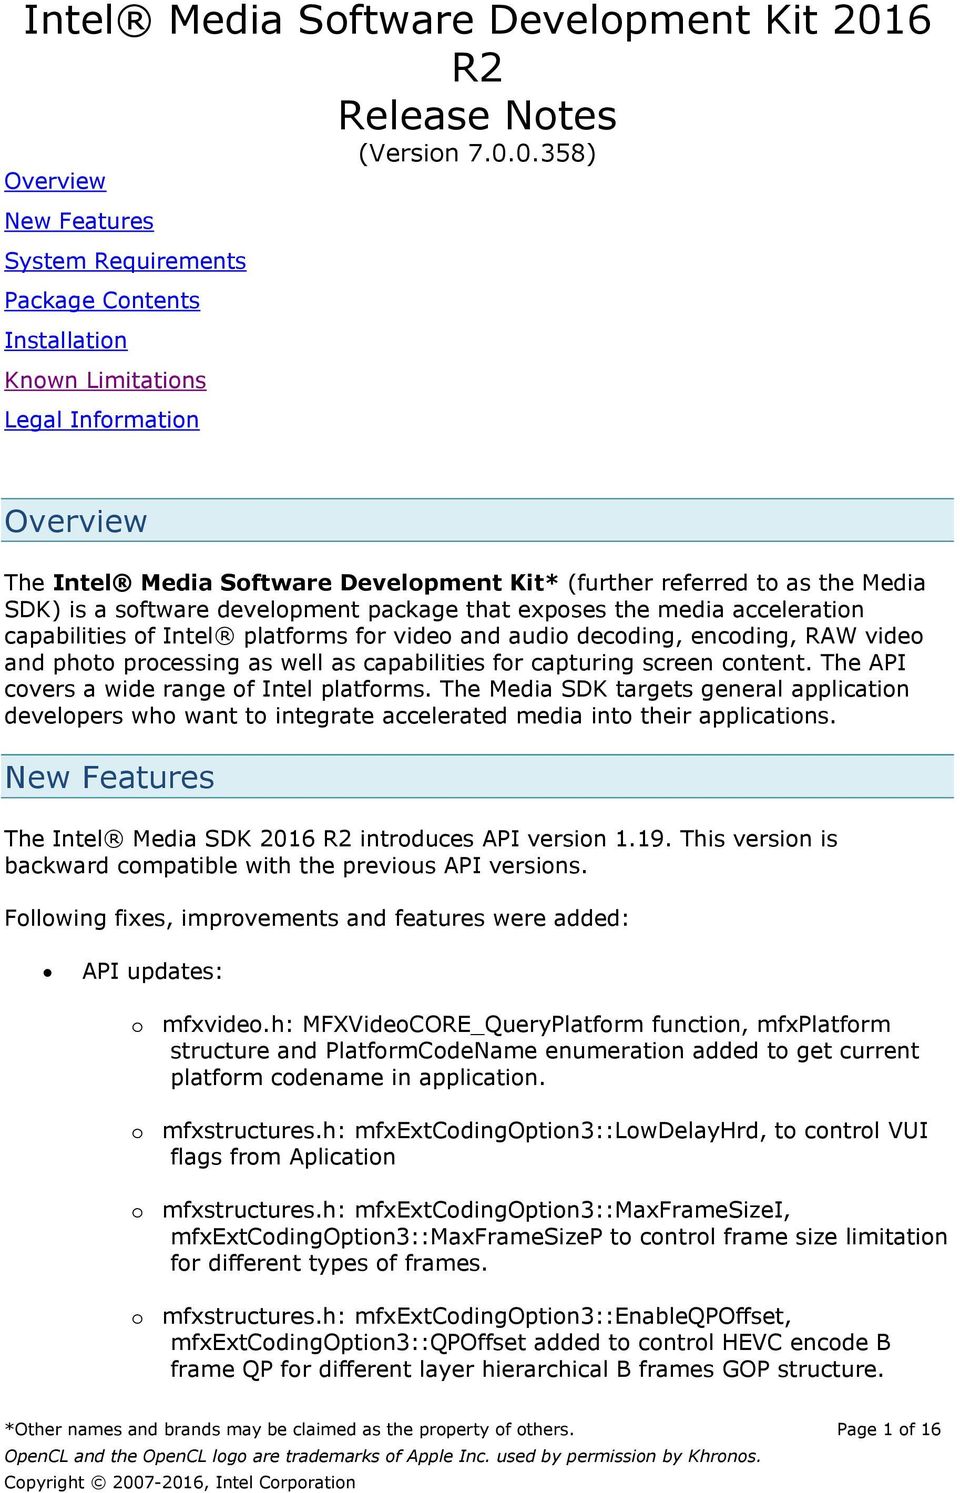 0.358) Overview New Features System Requirements Package Cntents Installatin Knwn Limitatins Legal Infrmatin Overview The Intel Media Sftware Develpment Kit* (further referred t as the Media SDK) is